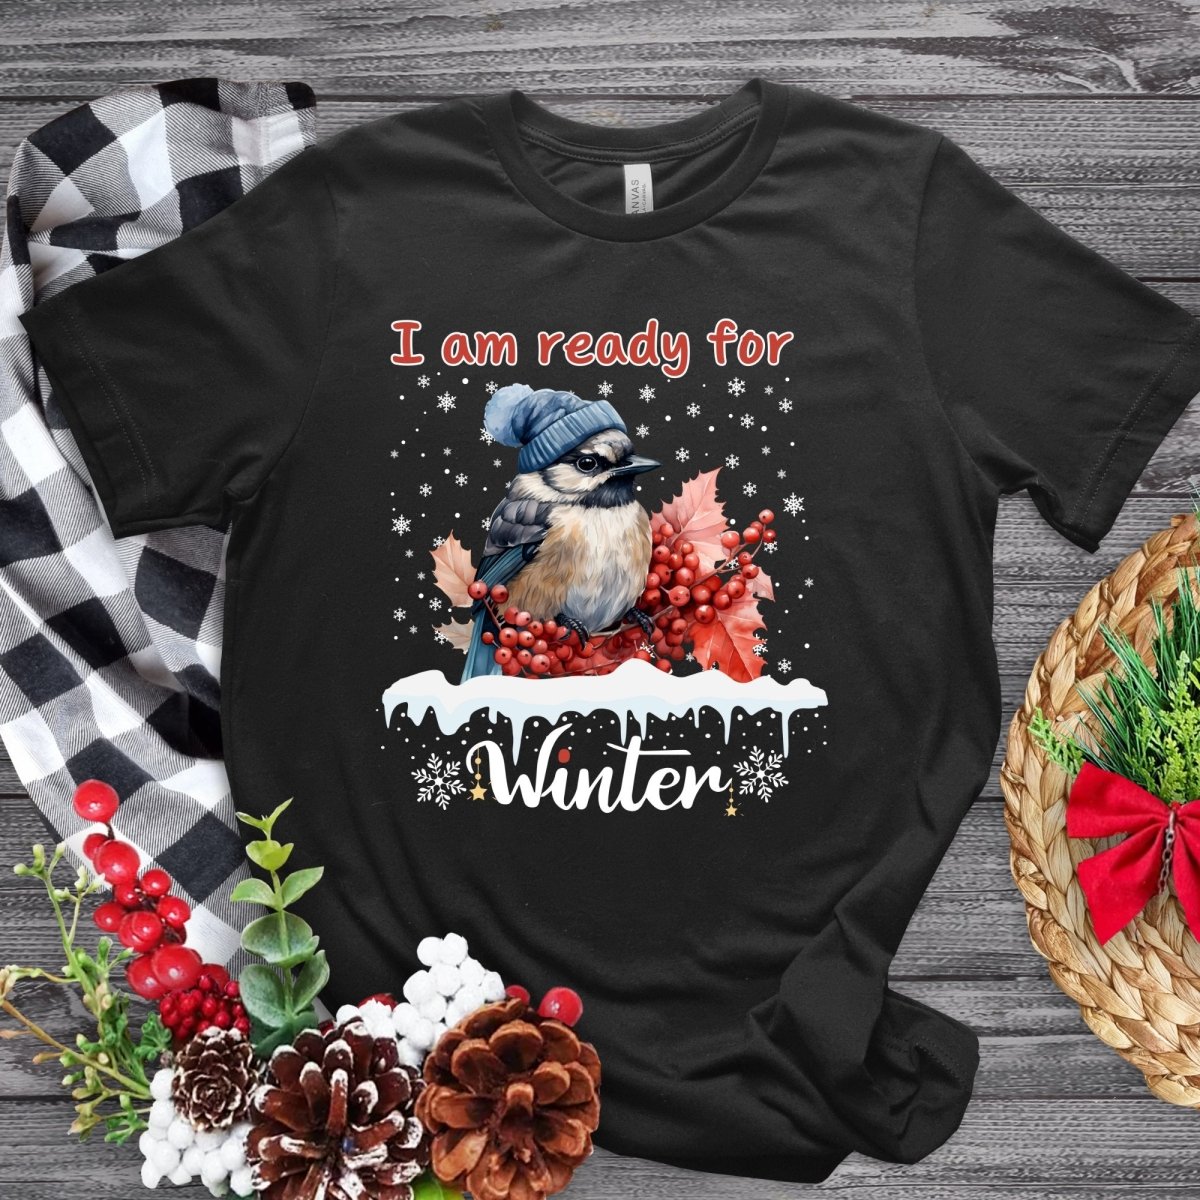 Ready for Winter T-Shirt - High Quality Funny Cute Bird Shirt, Funny Gift  for Bird Lover